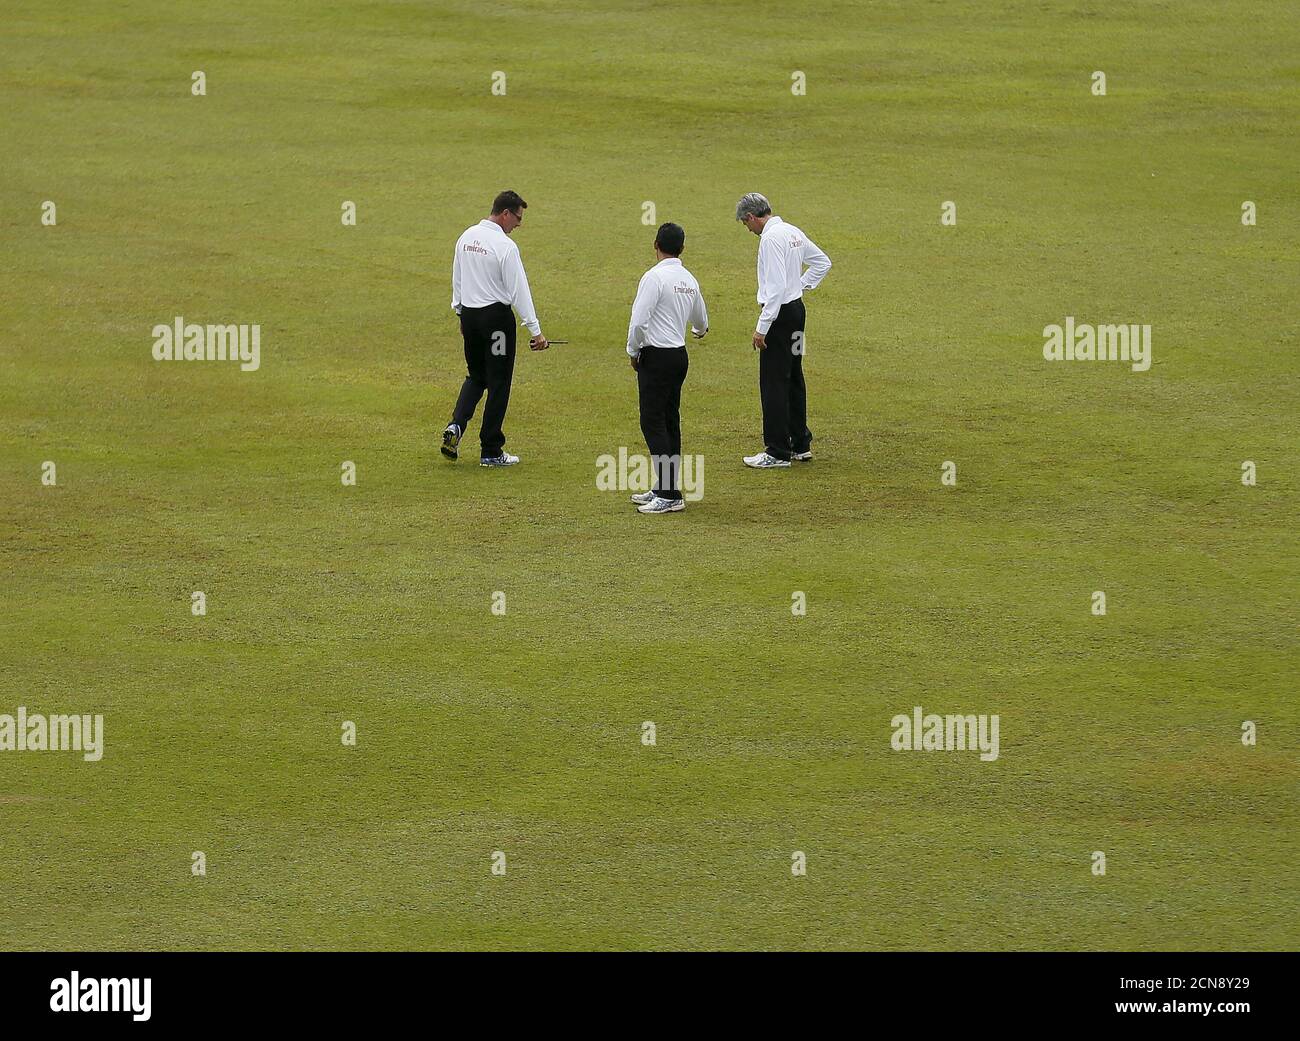 Umpires Nigel Llong (R) , Rod Tucker (L) and Ruchira Palliyaguruge inspect the ground condition after the rain, on the first day of third and final test cricket match between India and Sri Lanka in Colombo , August 28, 2015. REUTERS/Dinuka Liyanawatte Stock Photo